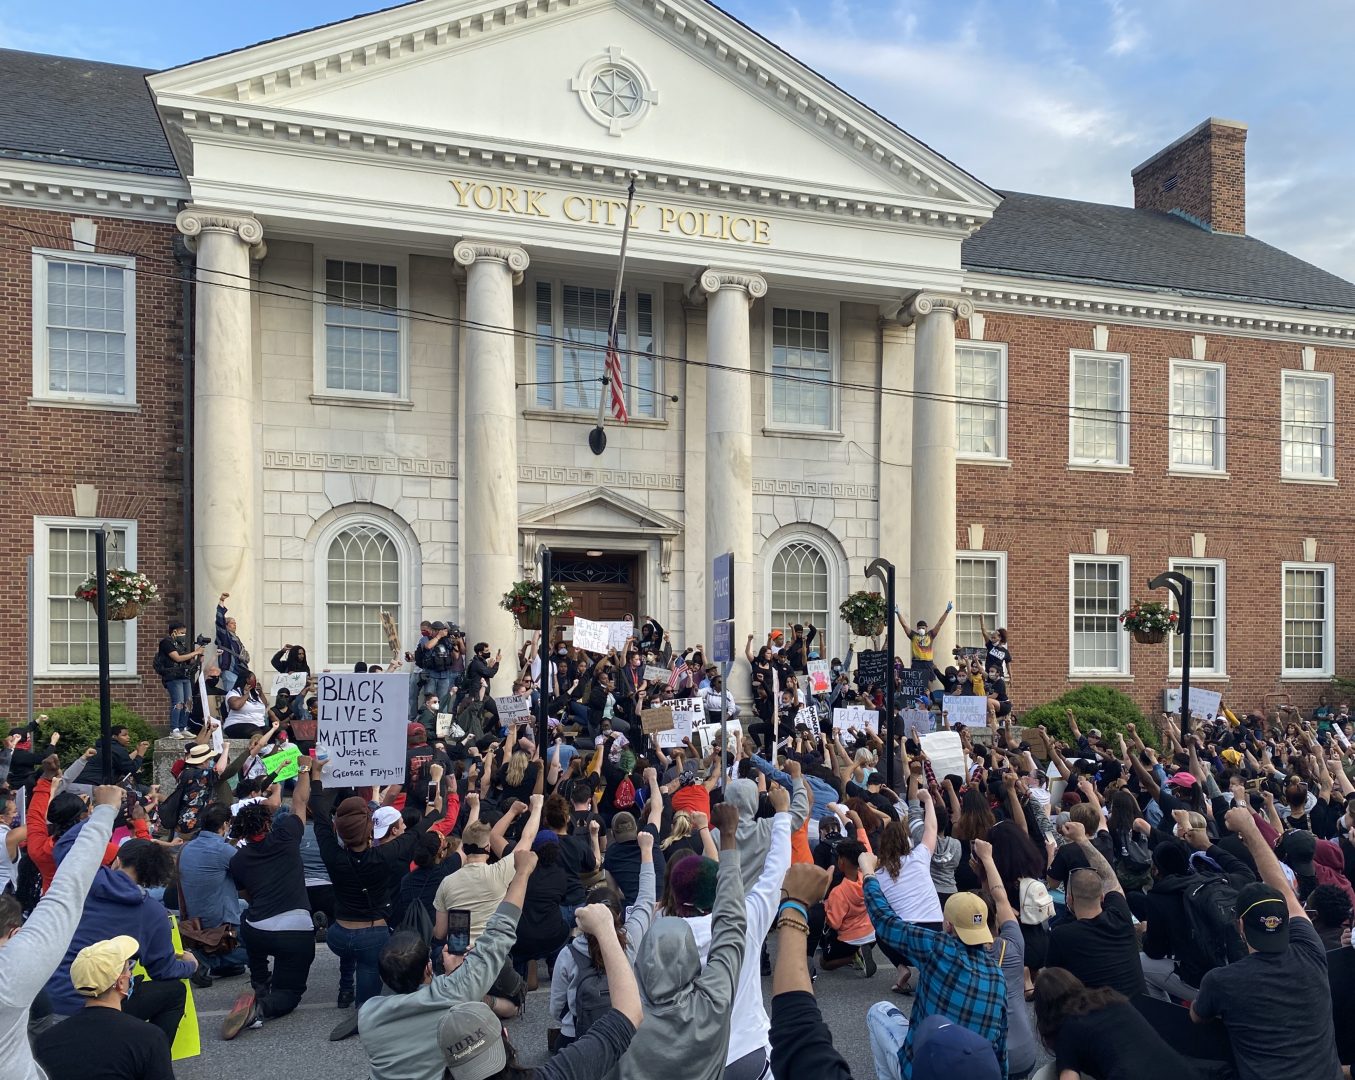 Protesters gather outside the York City Police Department on June 2, 2020. Later, the city posted its use-of-force policy online in an effort to build increase transparency and build trust.